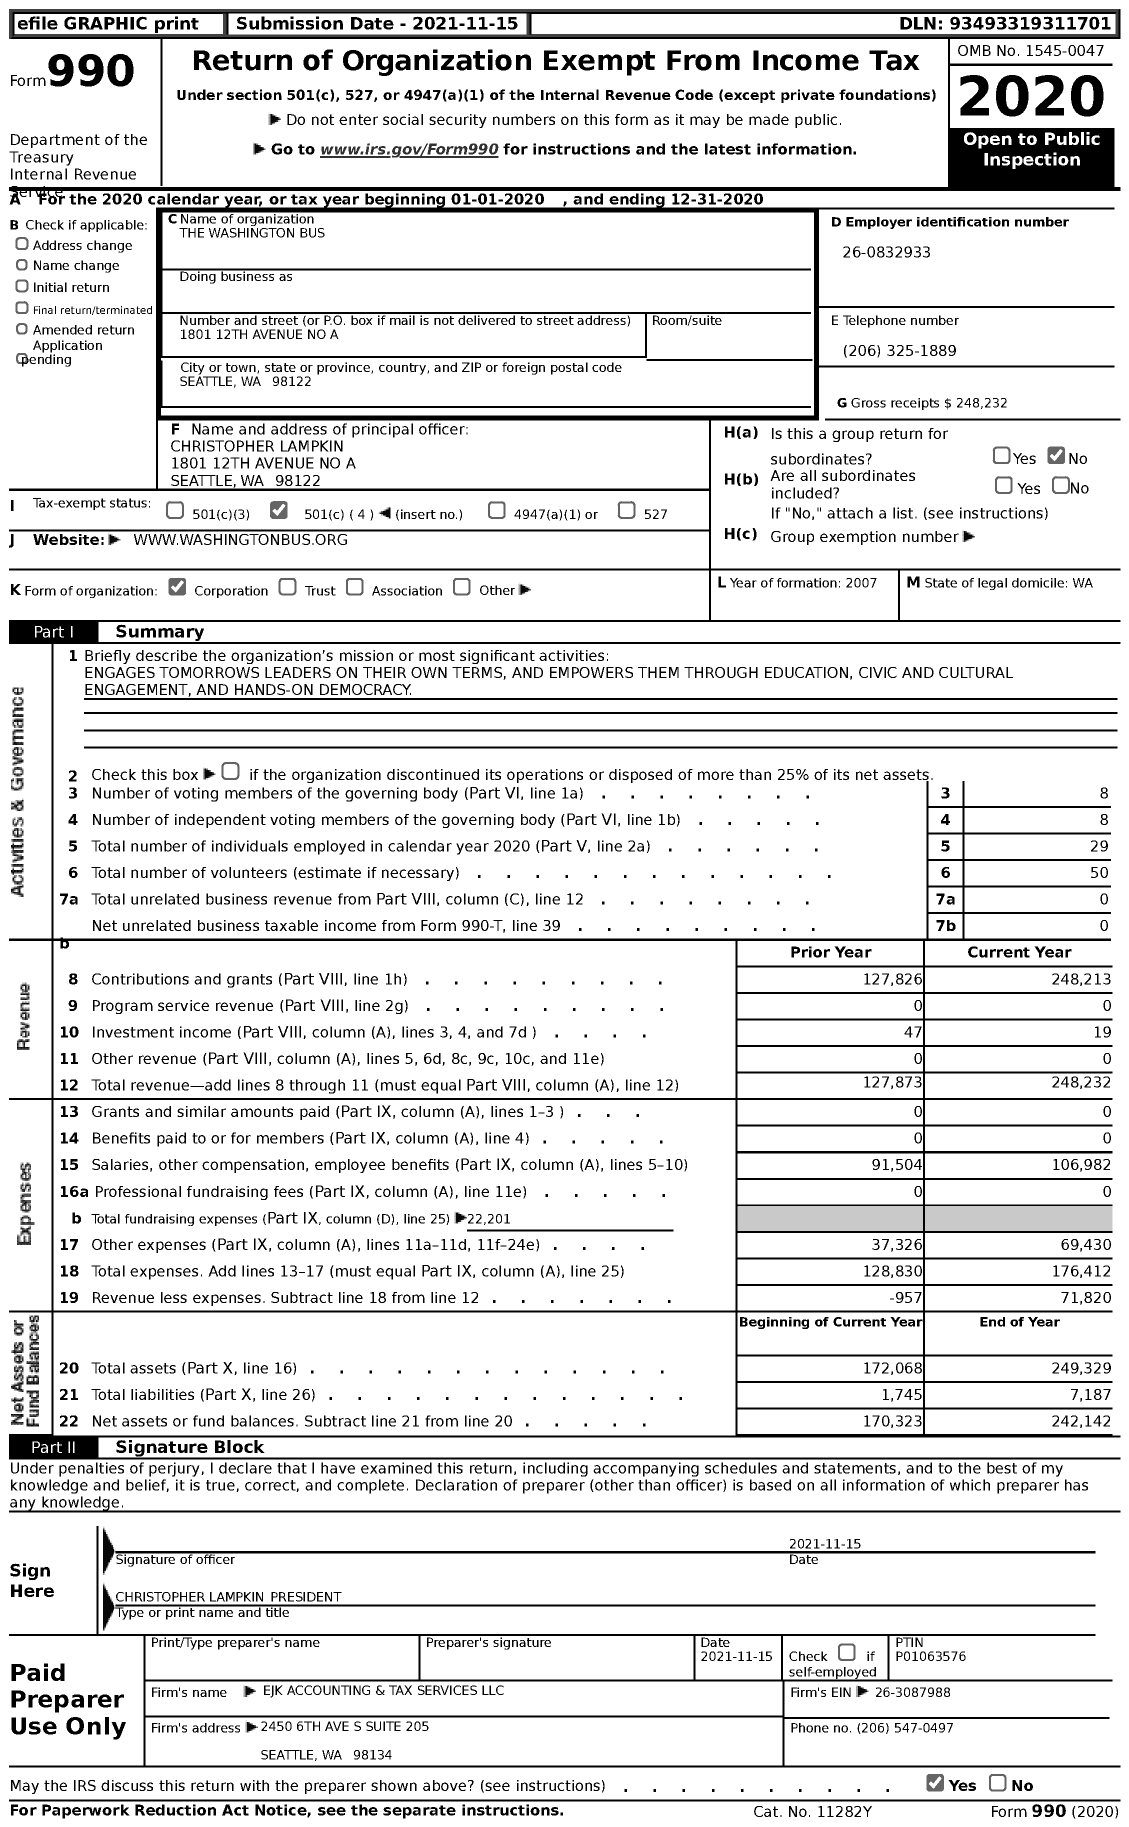 Image of first page of 2020 Form 990 for The Washington Bus